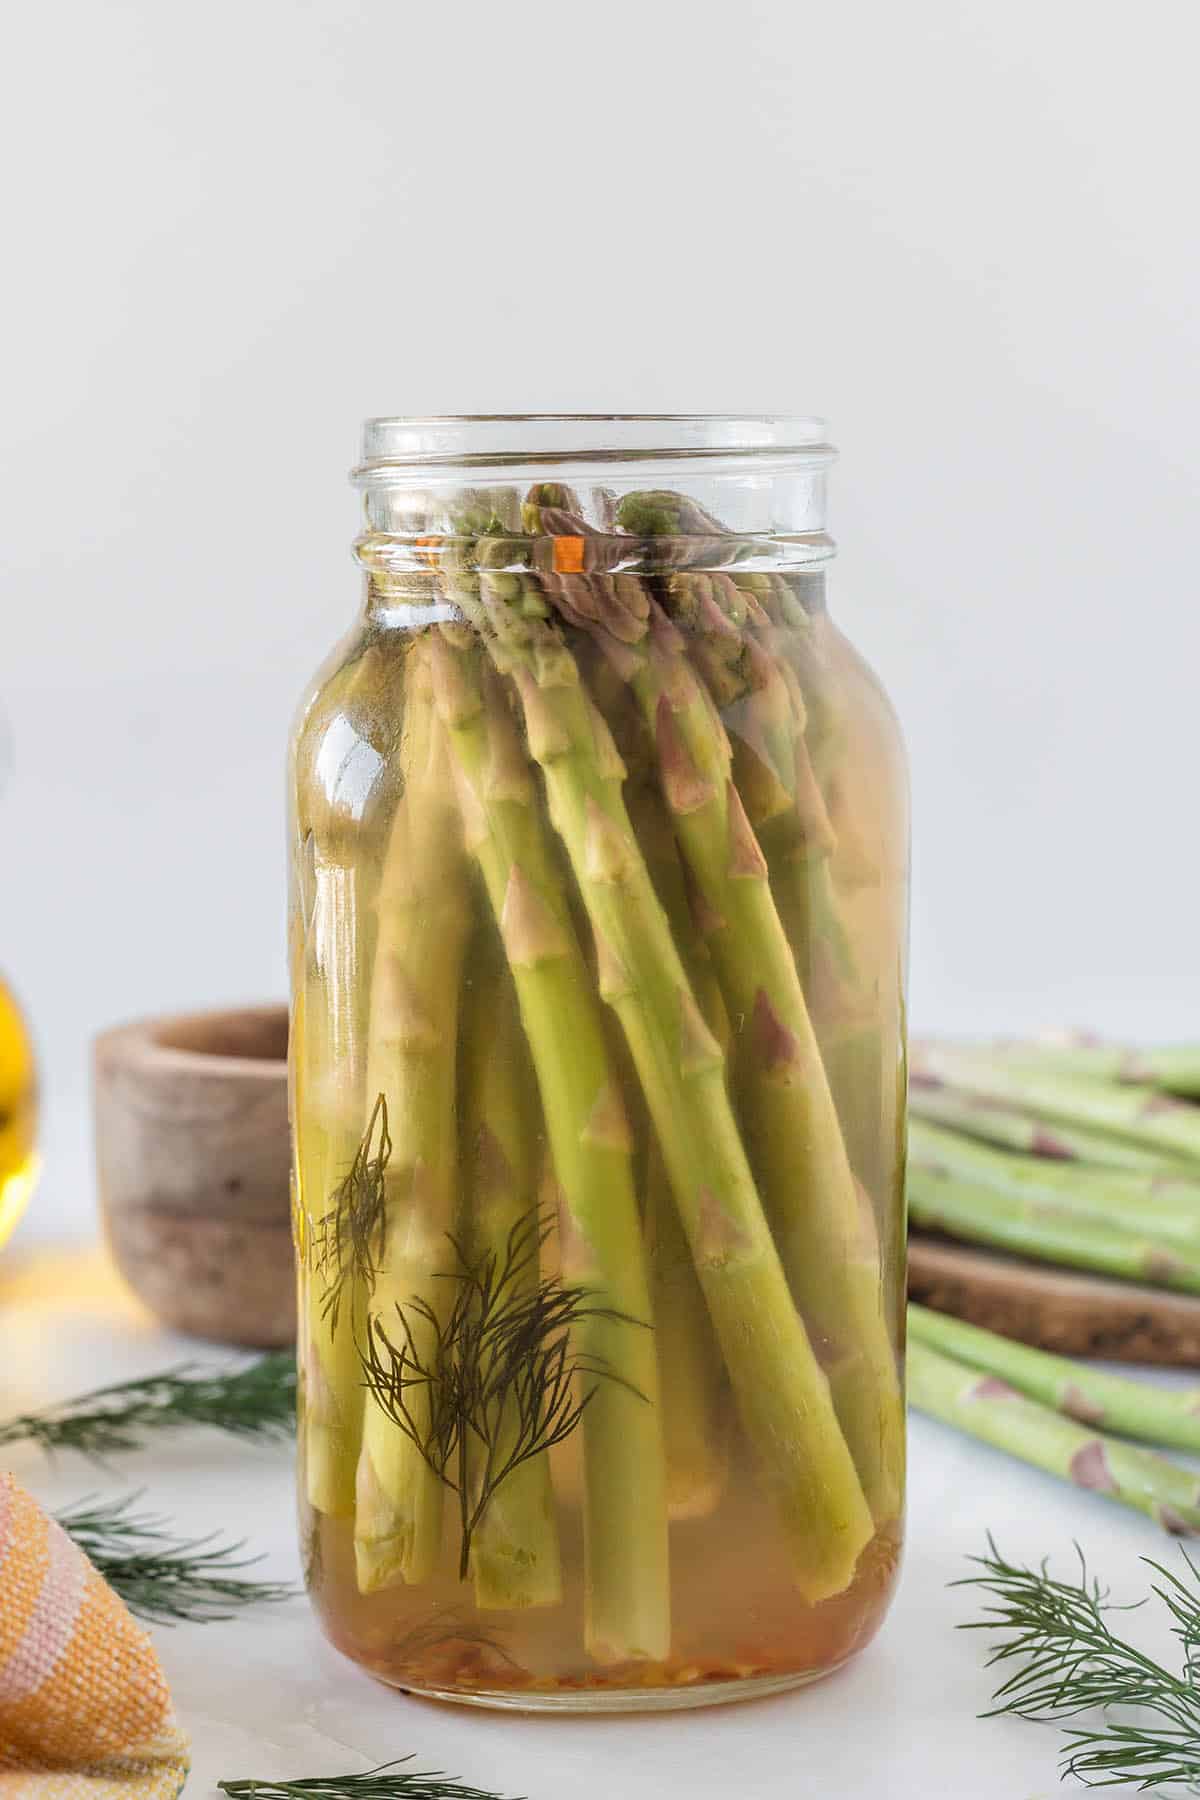 Spicy pickled asparagus in a jar.